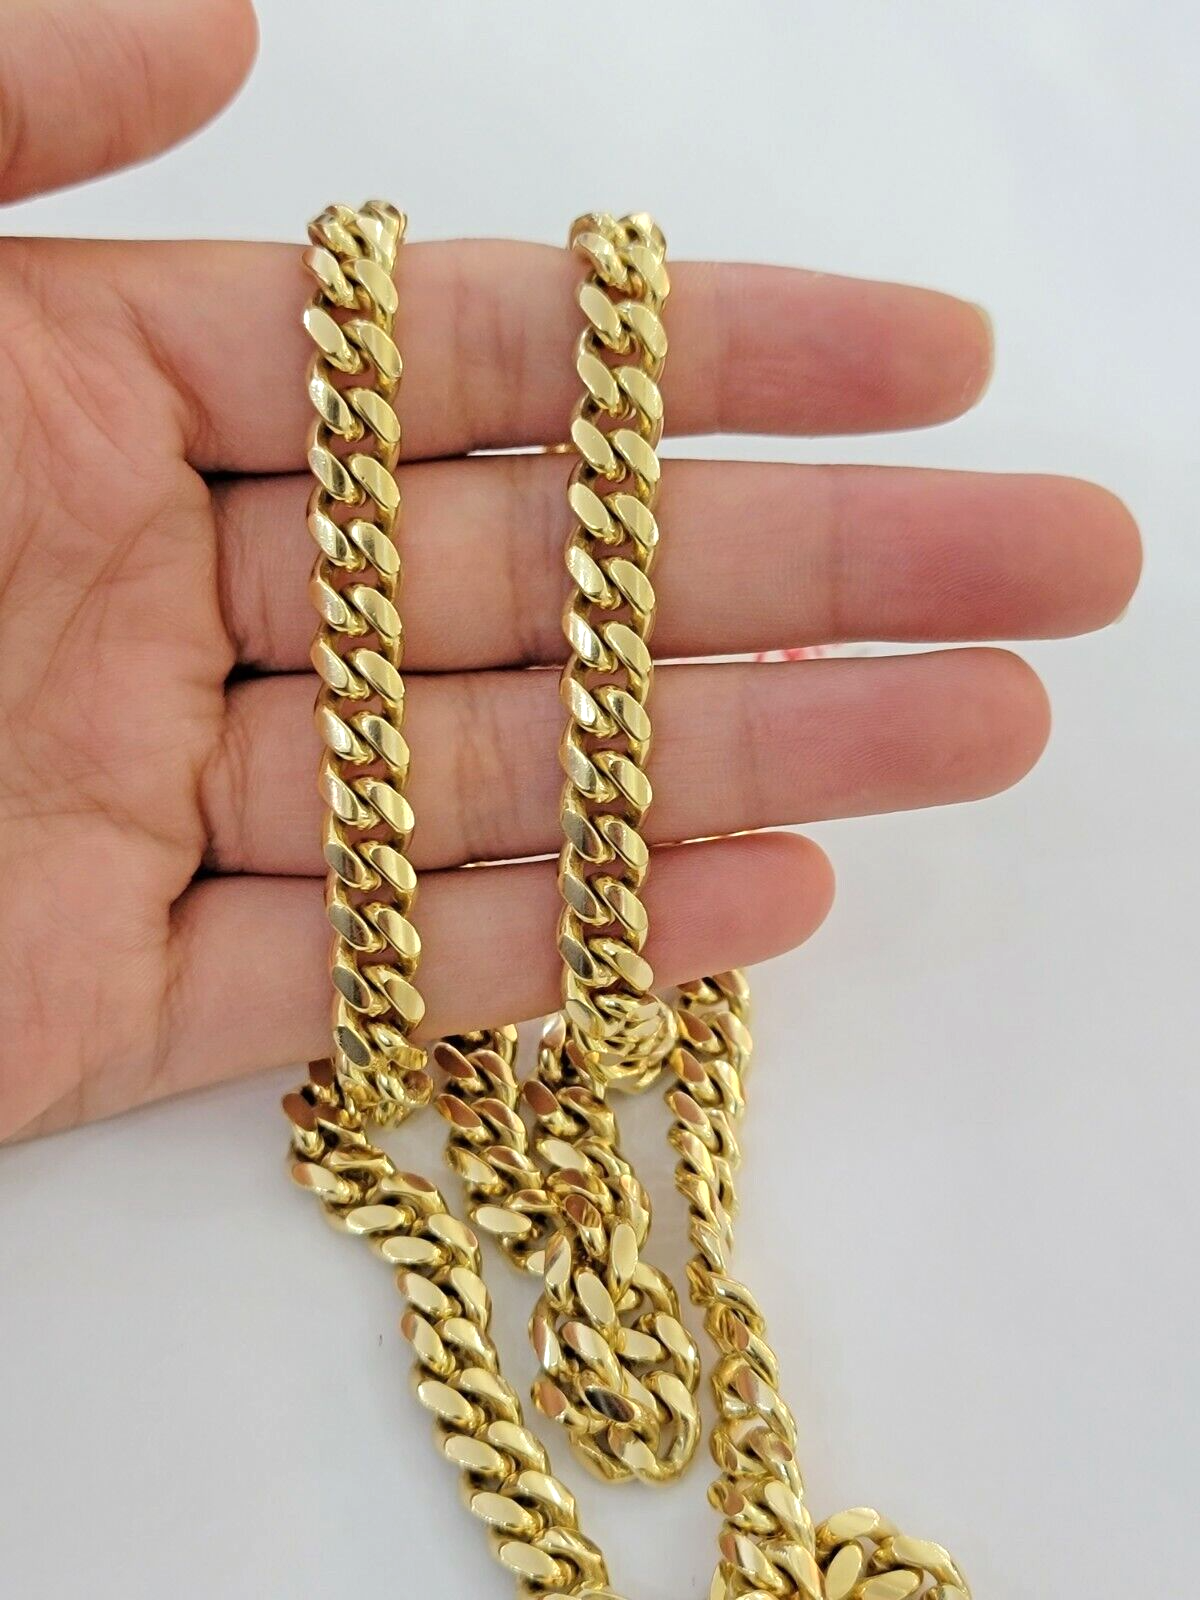 Solid 14k Gold Chain 7mm 22 Inch Miami Cuban Link  Necklace HEAVY Real Gold Sale